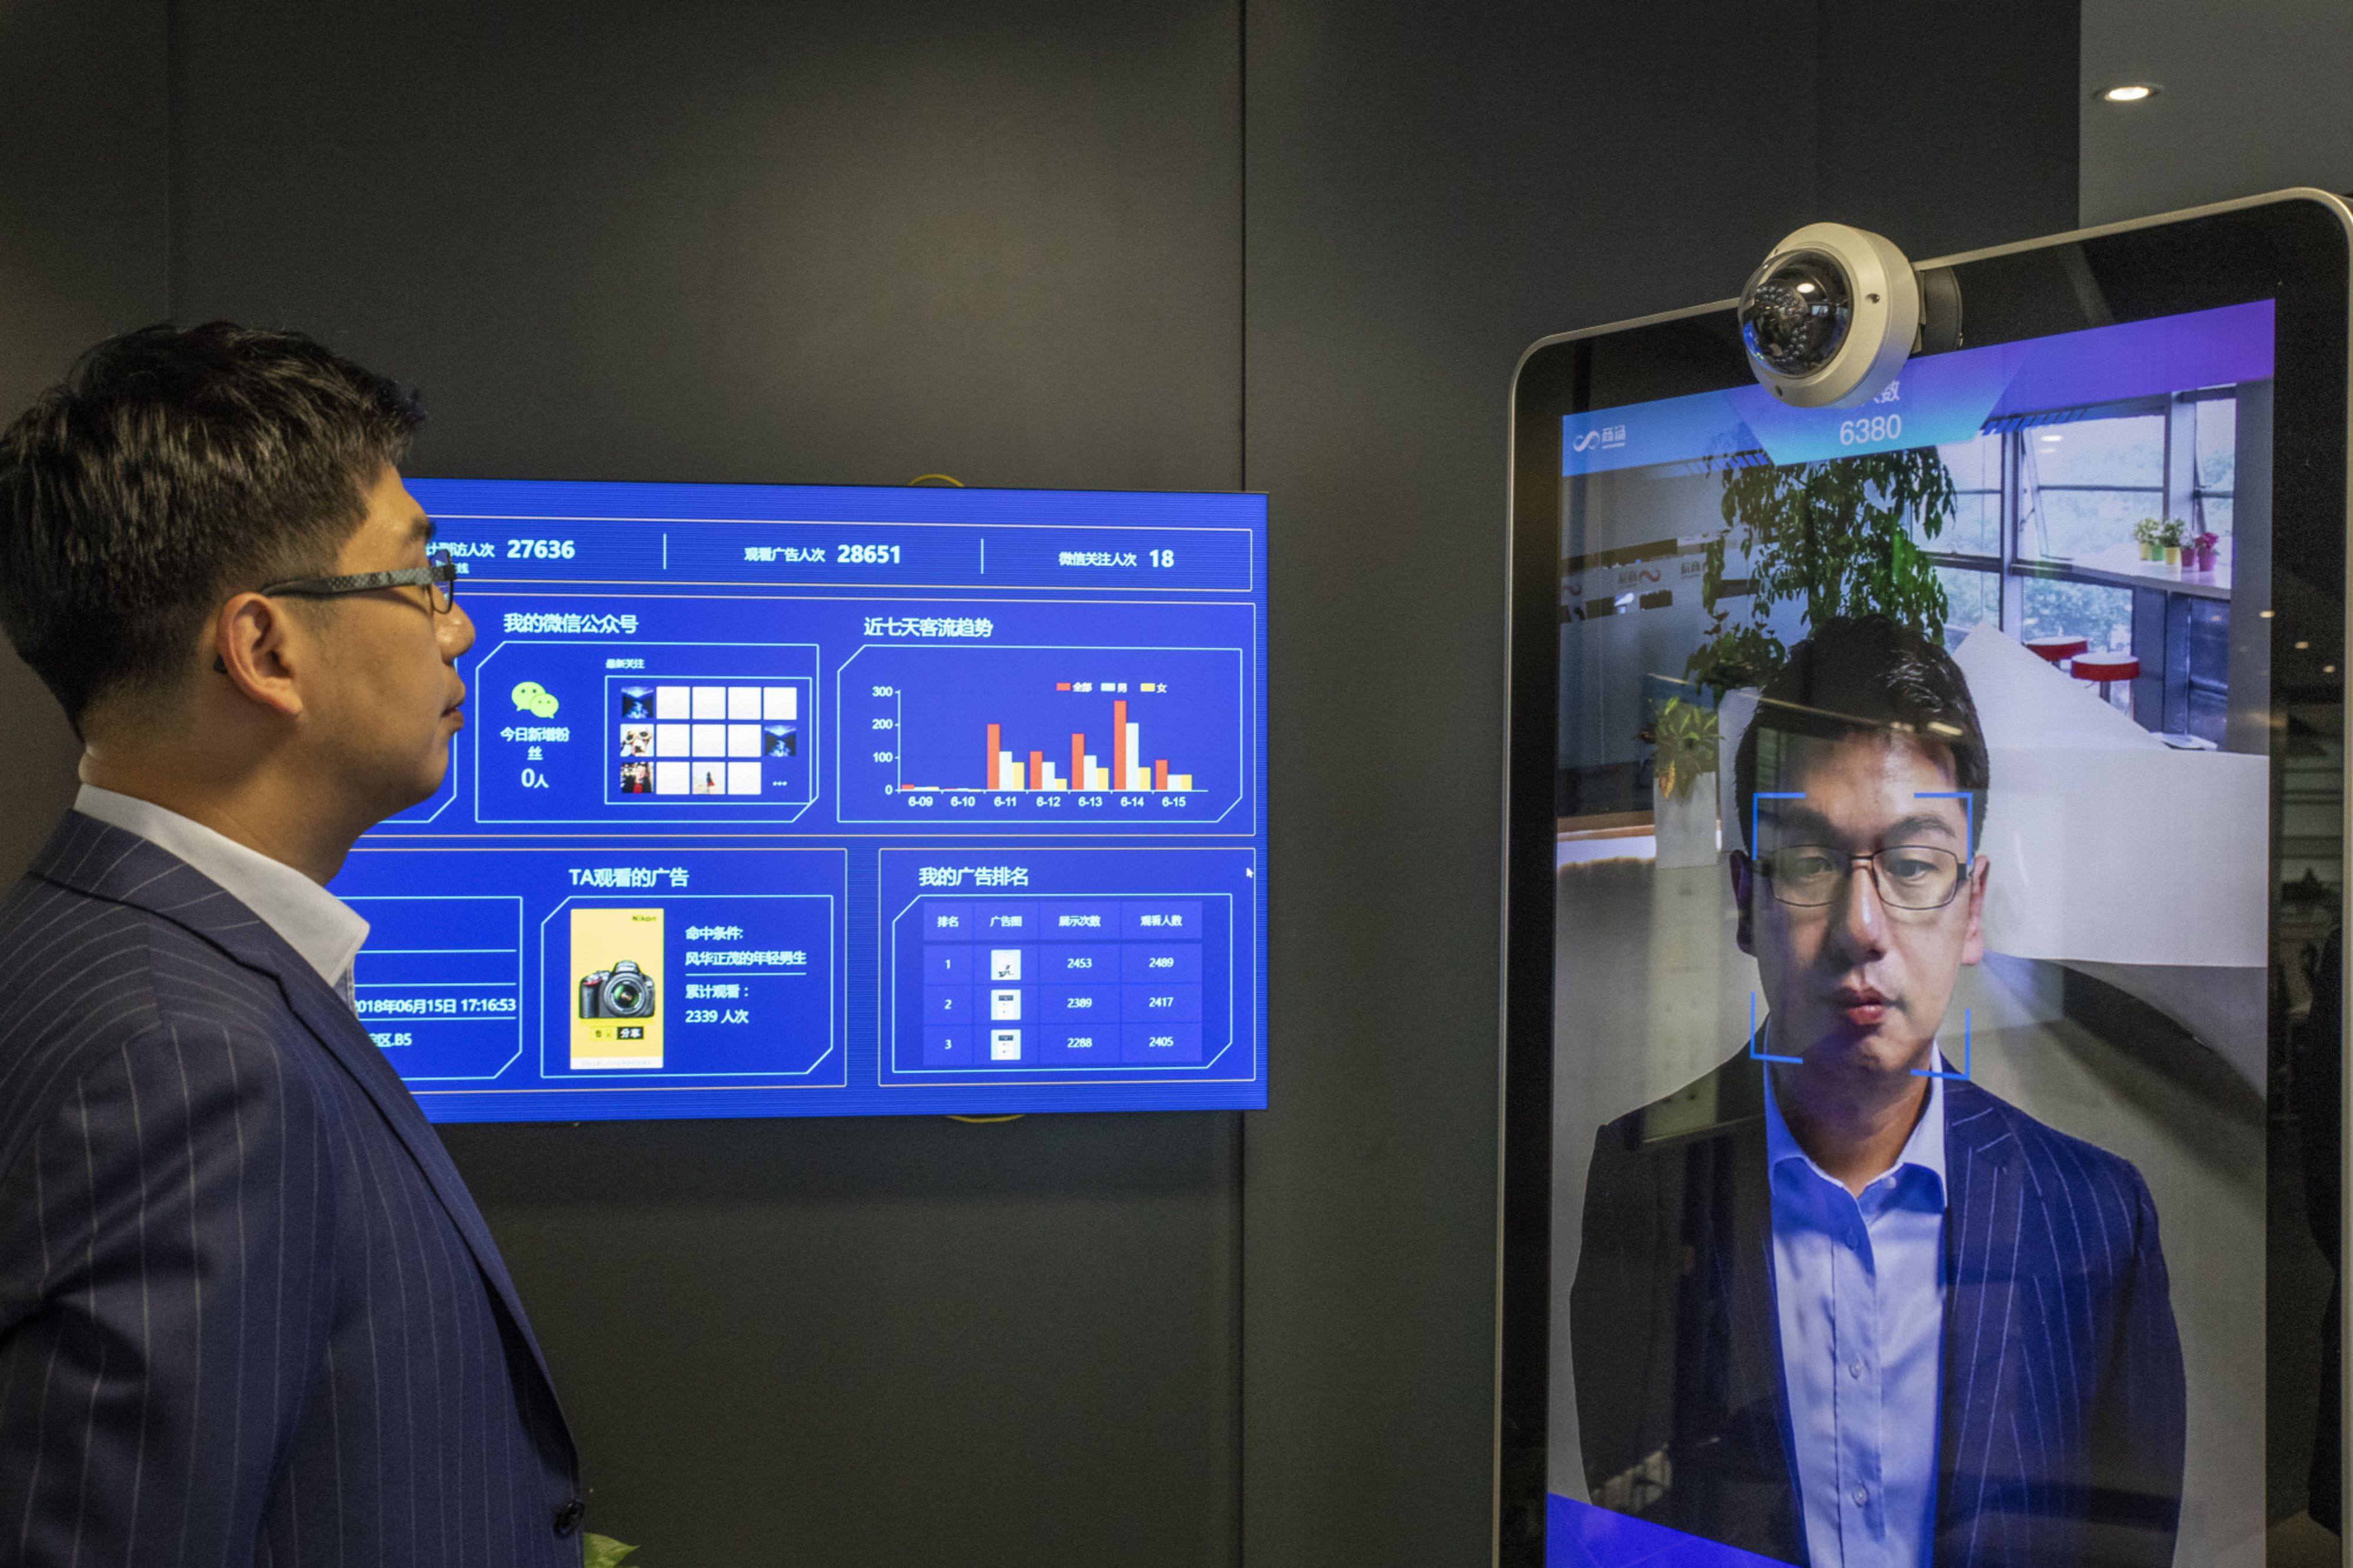 Xu Li, chief executive officer of SenseTime Group Ltd., is identified by the company’s facial recognition system on a screen as he poses for a photograph at SenseTime’s showroom in Beijing in 2018. Photo: Bloomberg